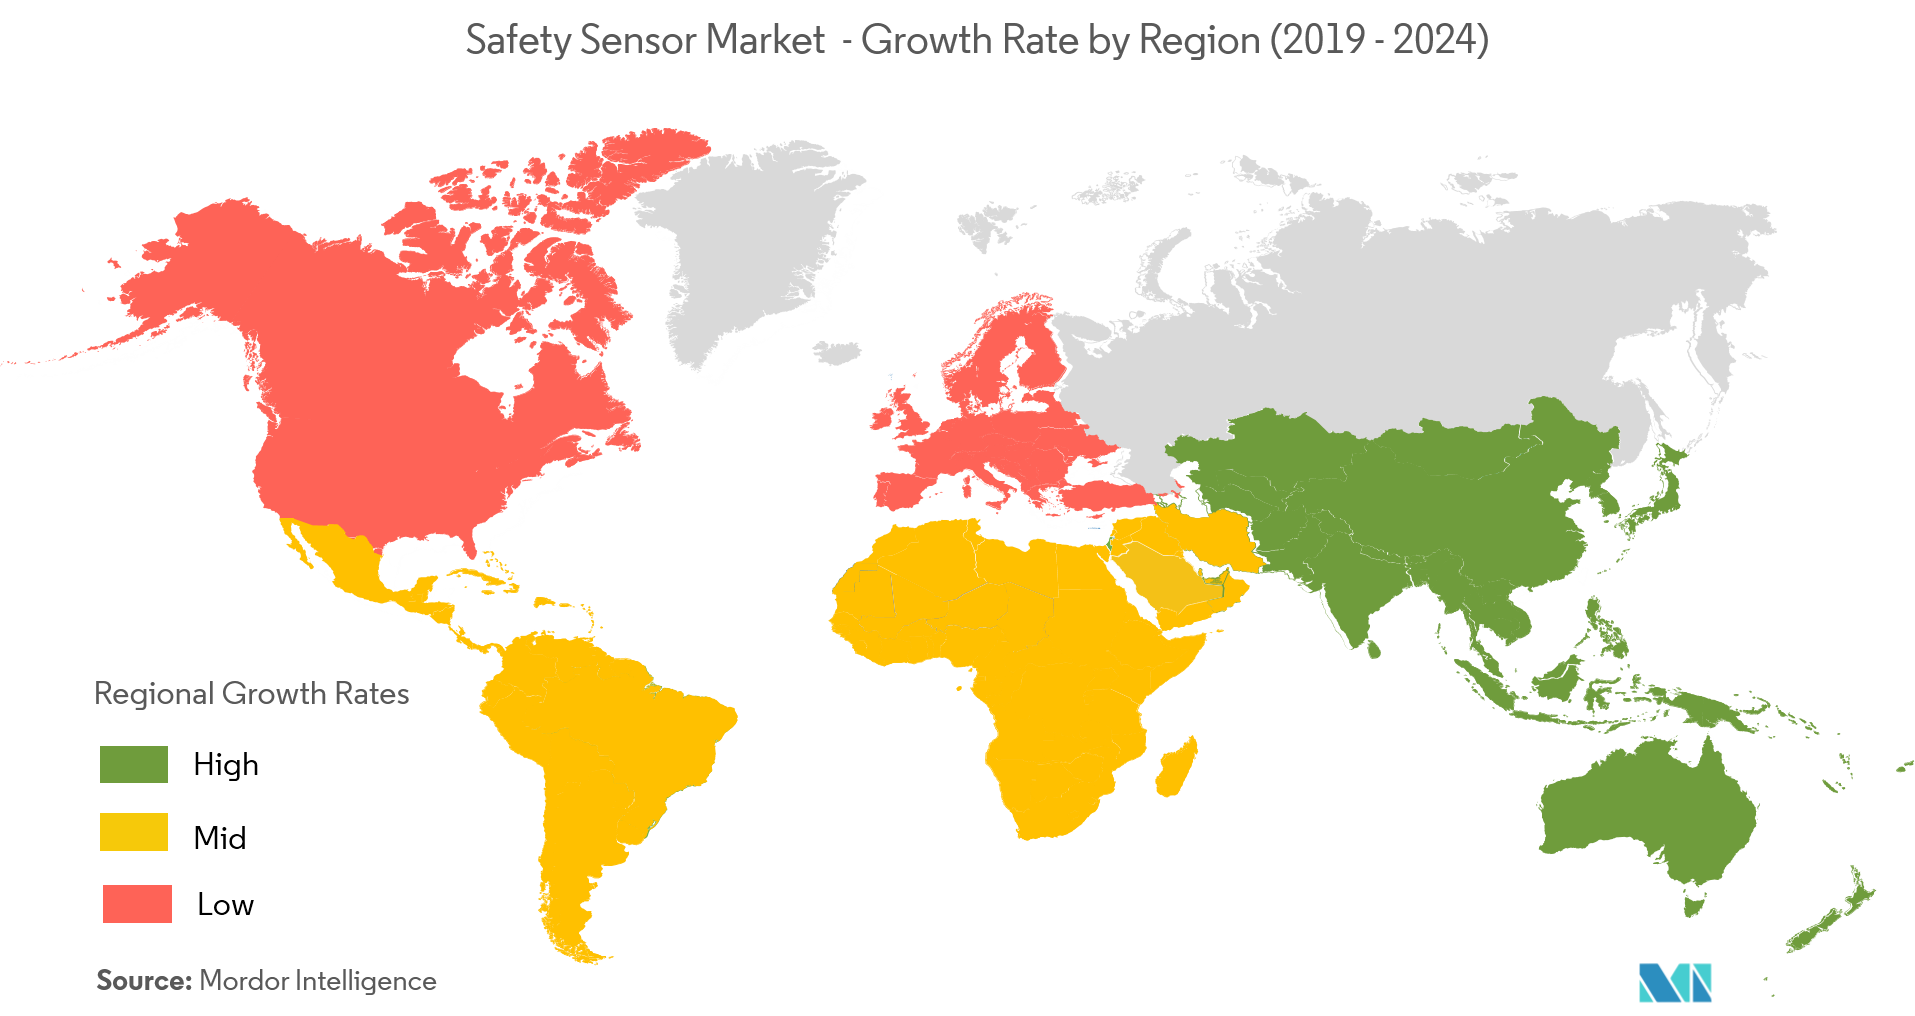 Safety sensors market growth by region